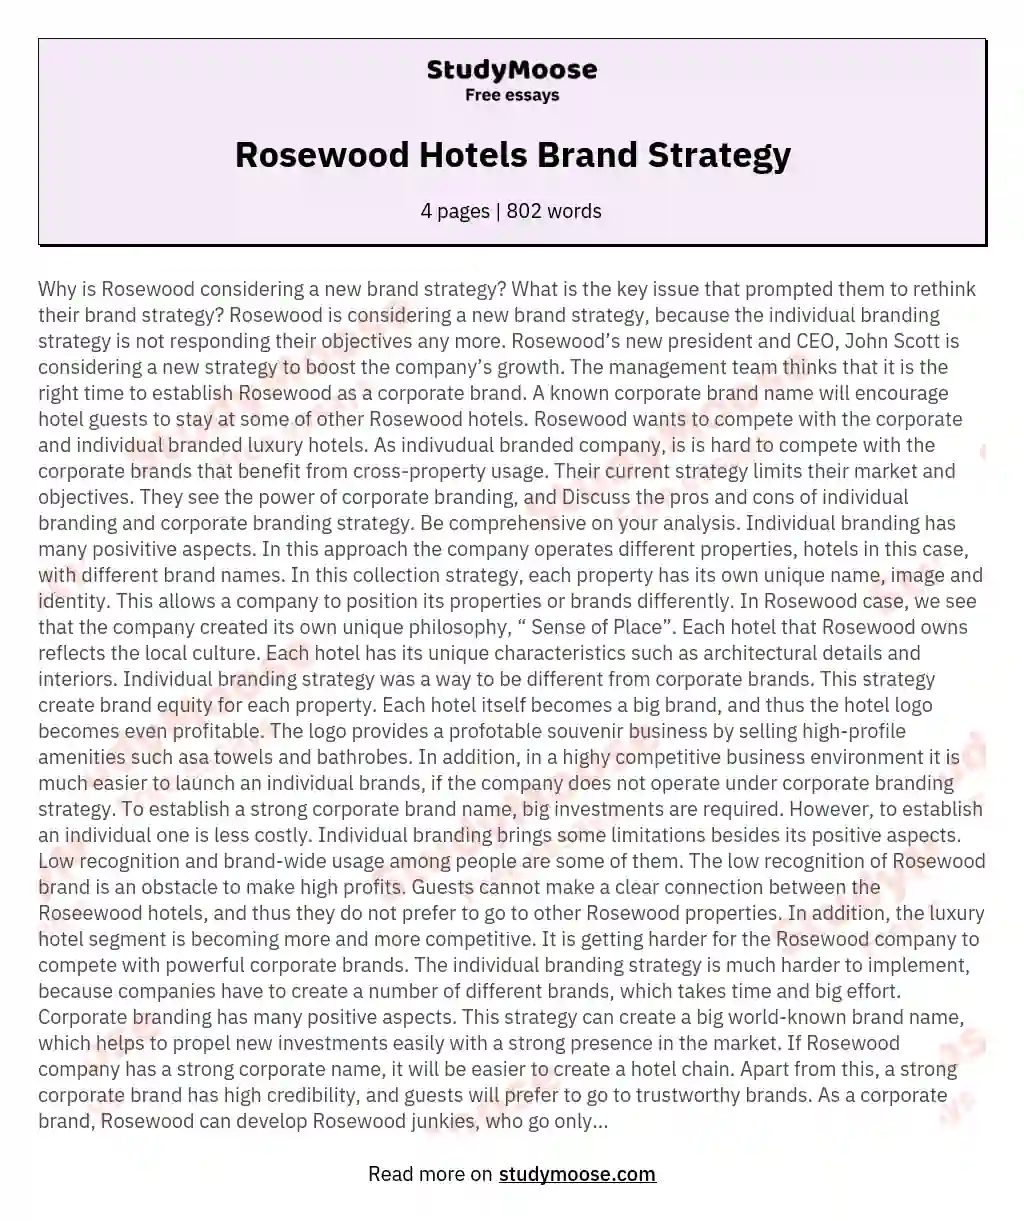 Rosewood Hotels Brand Strategy essay